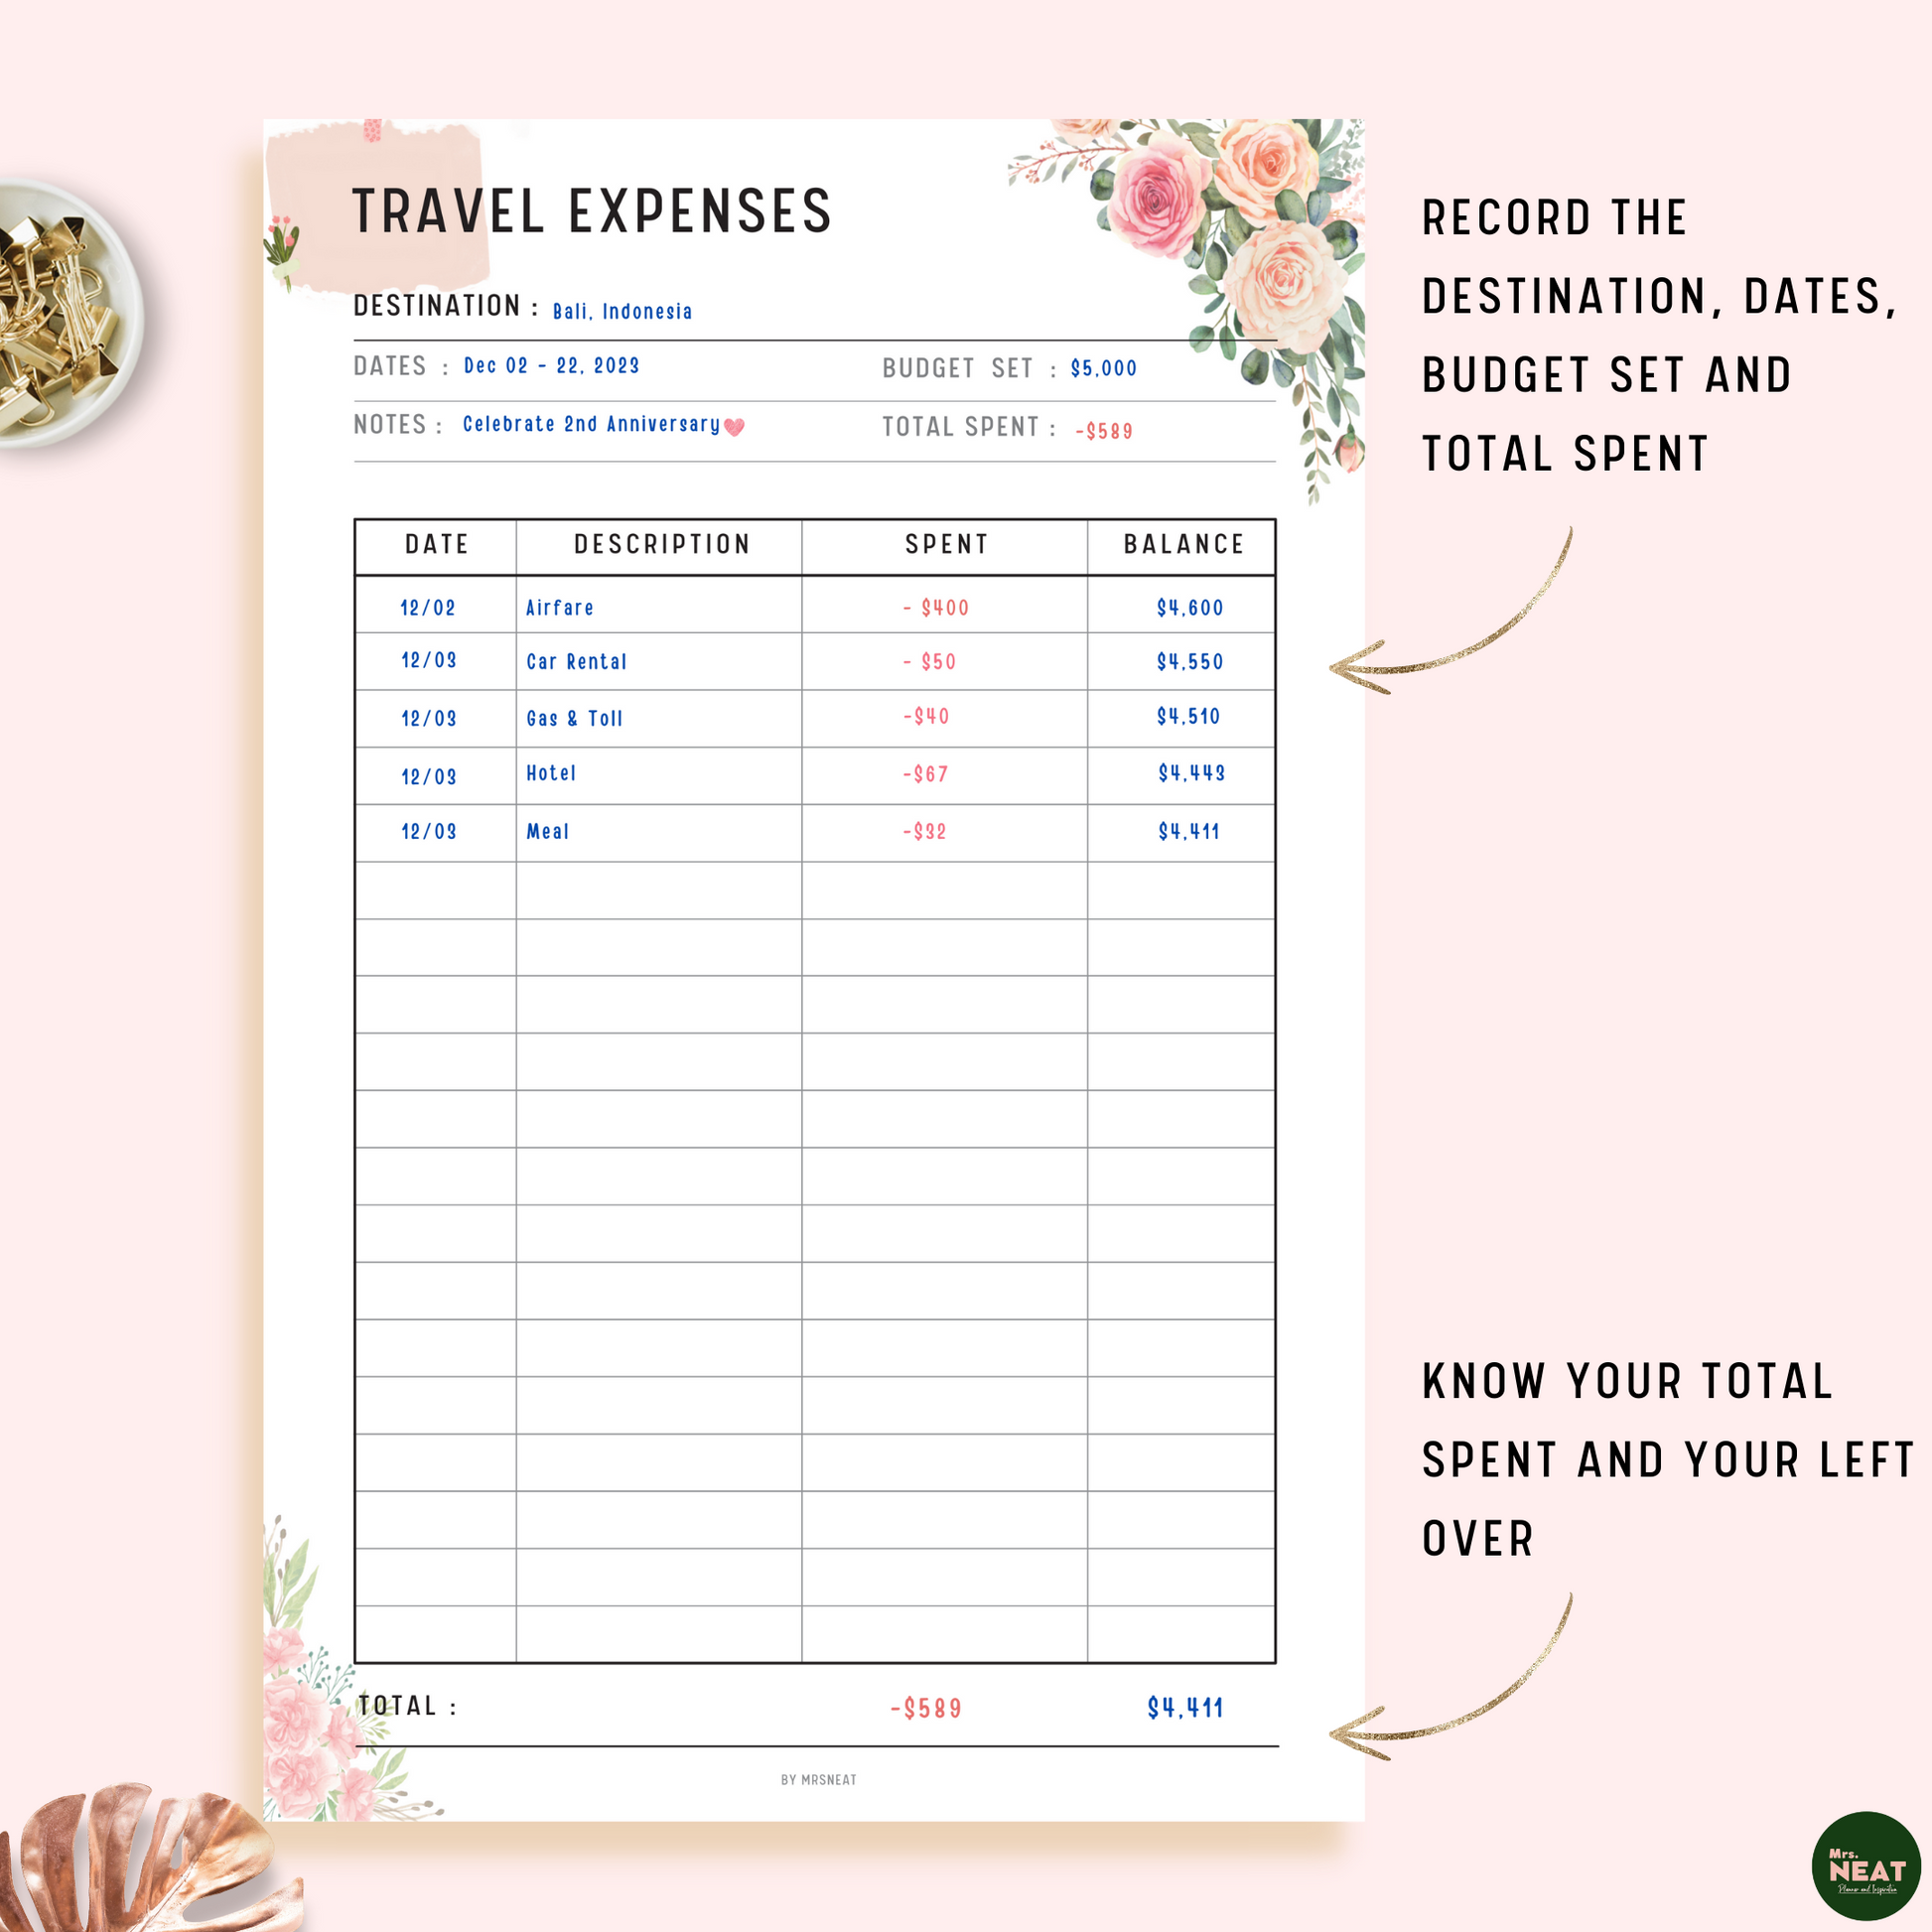 Floral Travel Expenses Tracker Planner with room for destination, travel dates, budget set and total spent